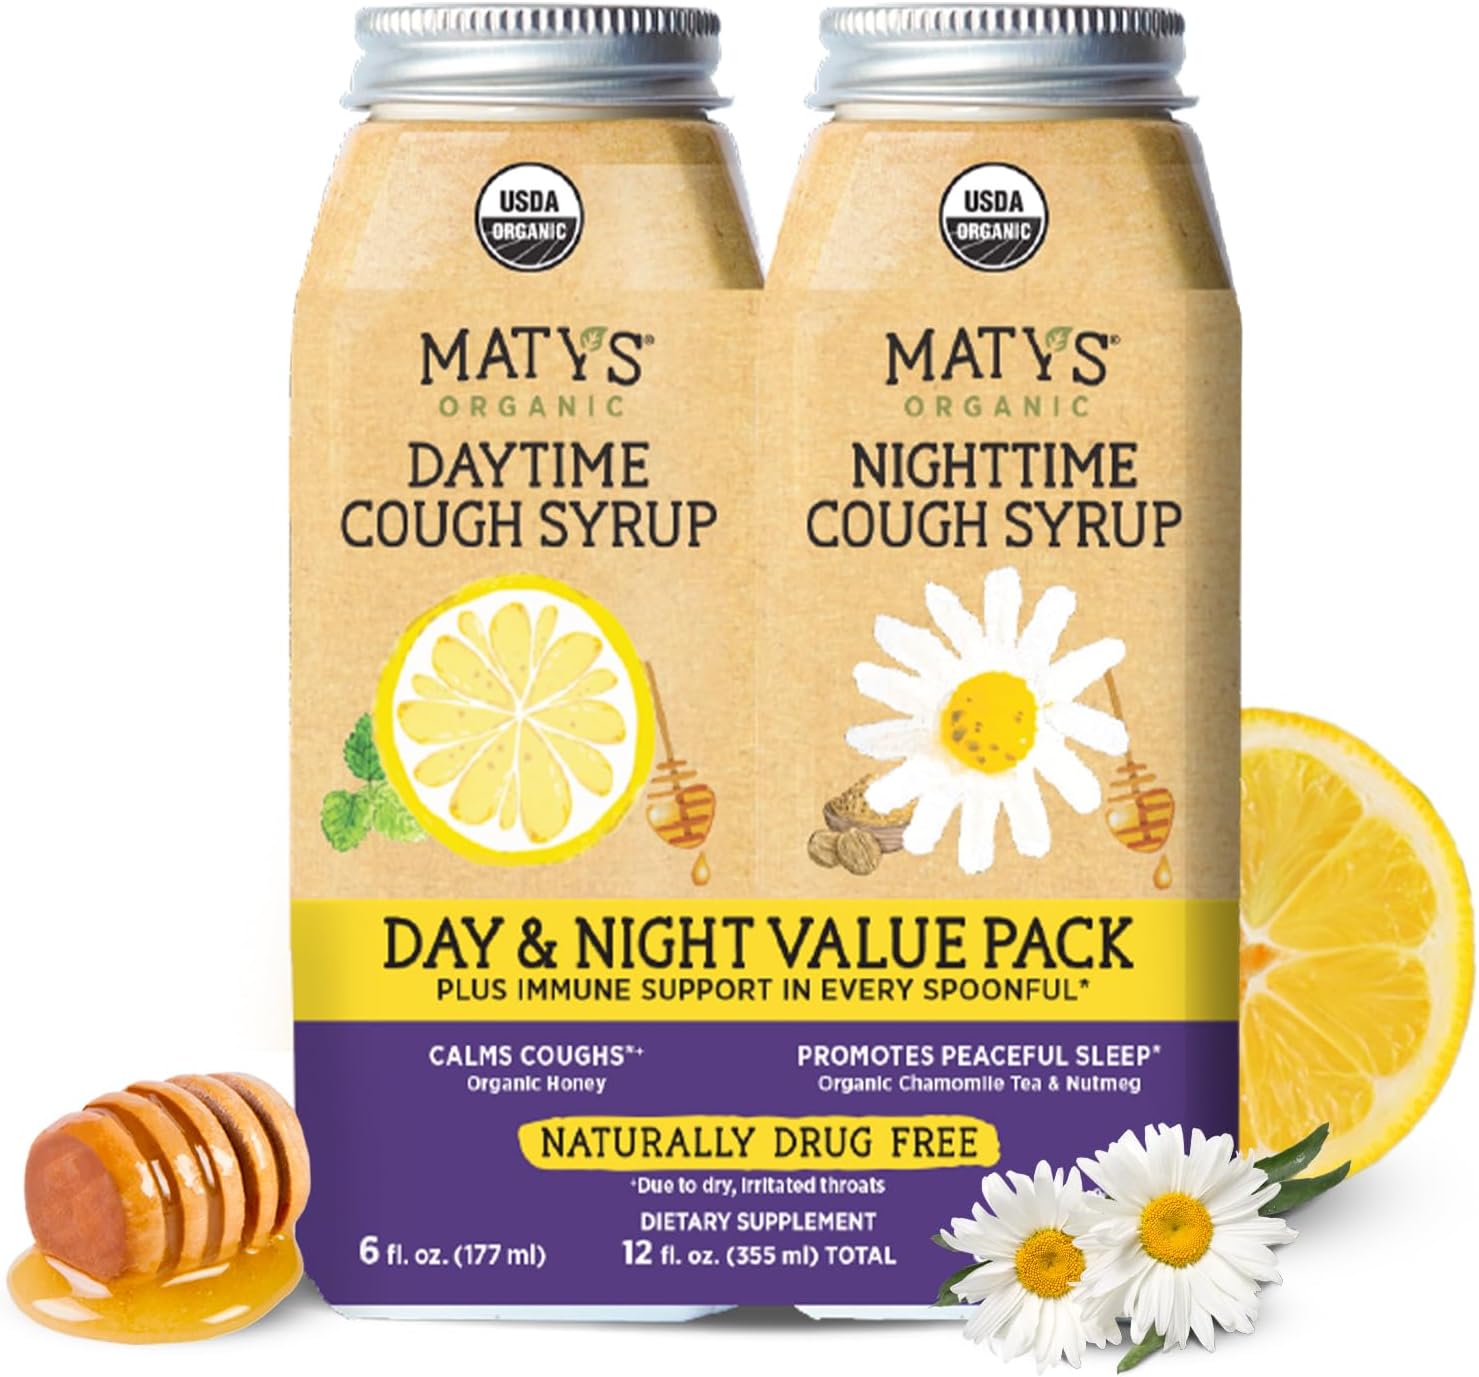 Matys Organic Adult Cough Syrup Day & Night Value Pack for Adults & Children 12 Years + Up, Soothing Daytime & Nighttime Cough Relief w/Organic Honey & Zinc, Alcohol & Drug Free, 2 Pack, 6 Fl Oz Each